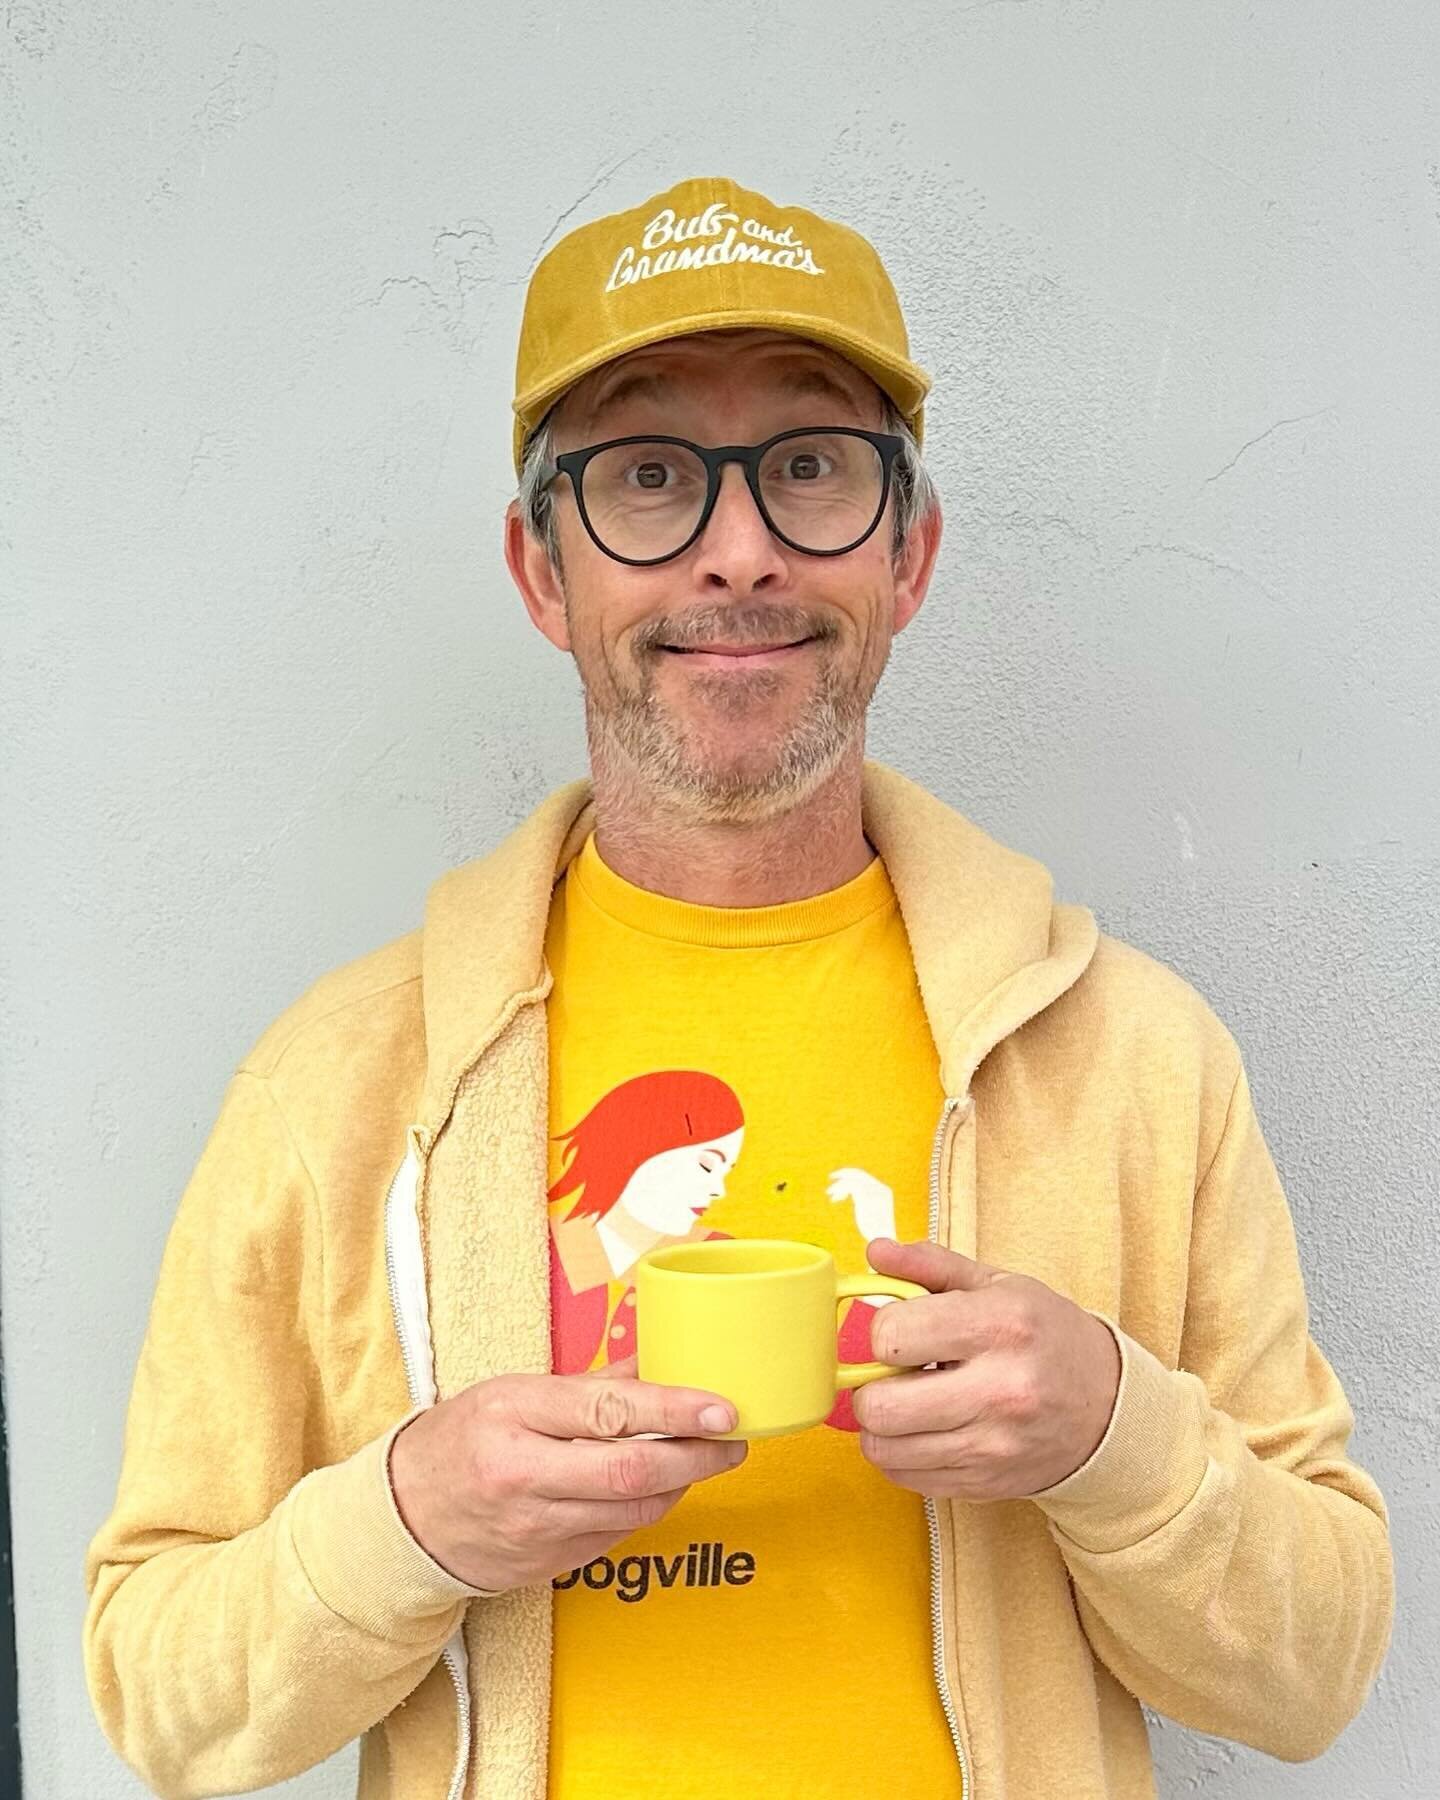 new yellow @luvhaus cups for coffee drinks
the universe just brings it all together somehow
splendid